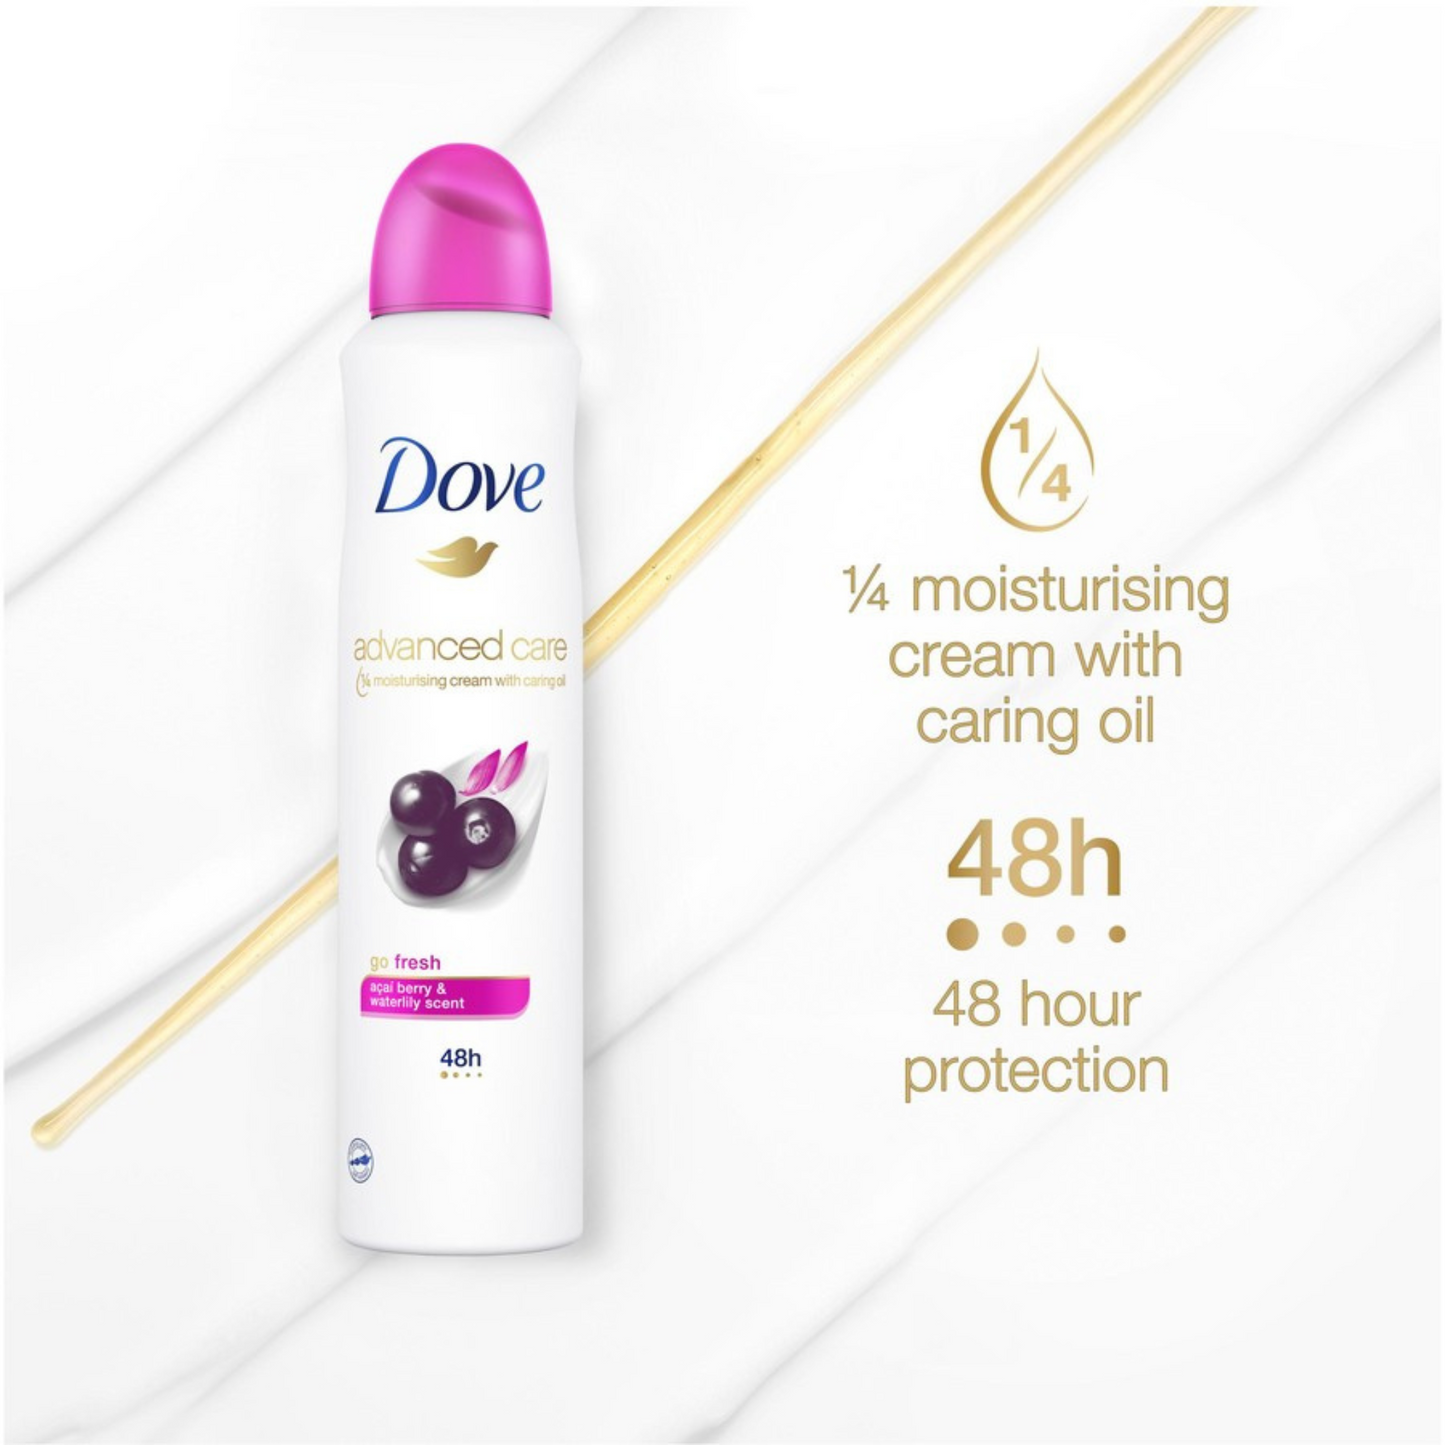 Dove Advanced Care Acai Berry & Waterlily is a deodorant that cares for your underarms for up to 48 hours. Best imported foreign Australian Aussie American genuine authentic original premium quality real hygiene skincare beauty skin care personal healthy underarms price in Dhaka Chittagong Sylhet Barisal Bangladesh.